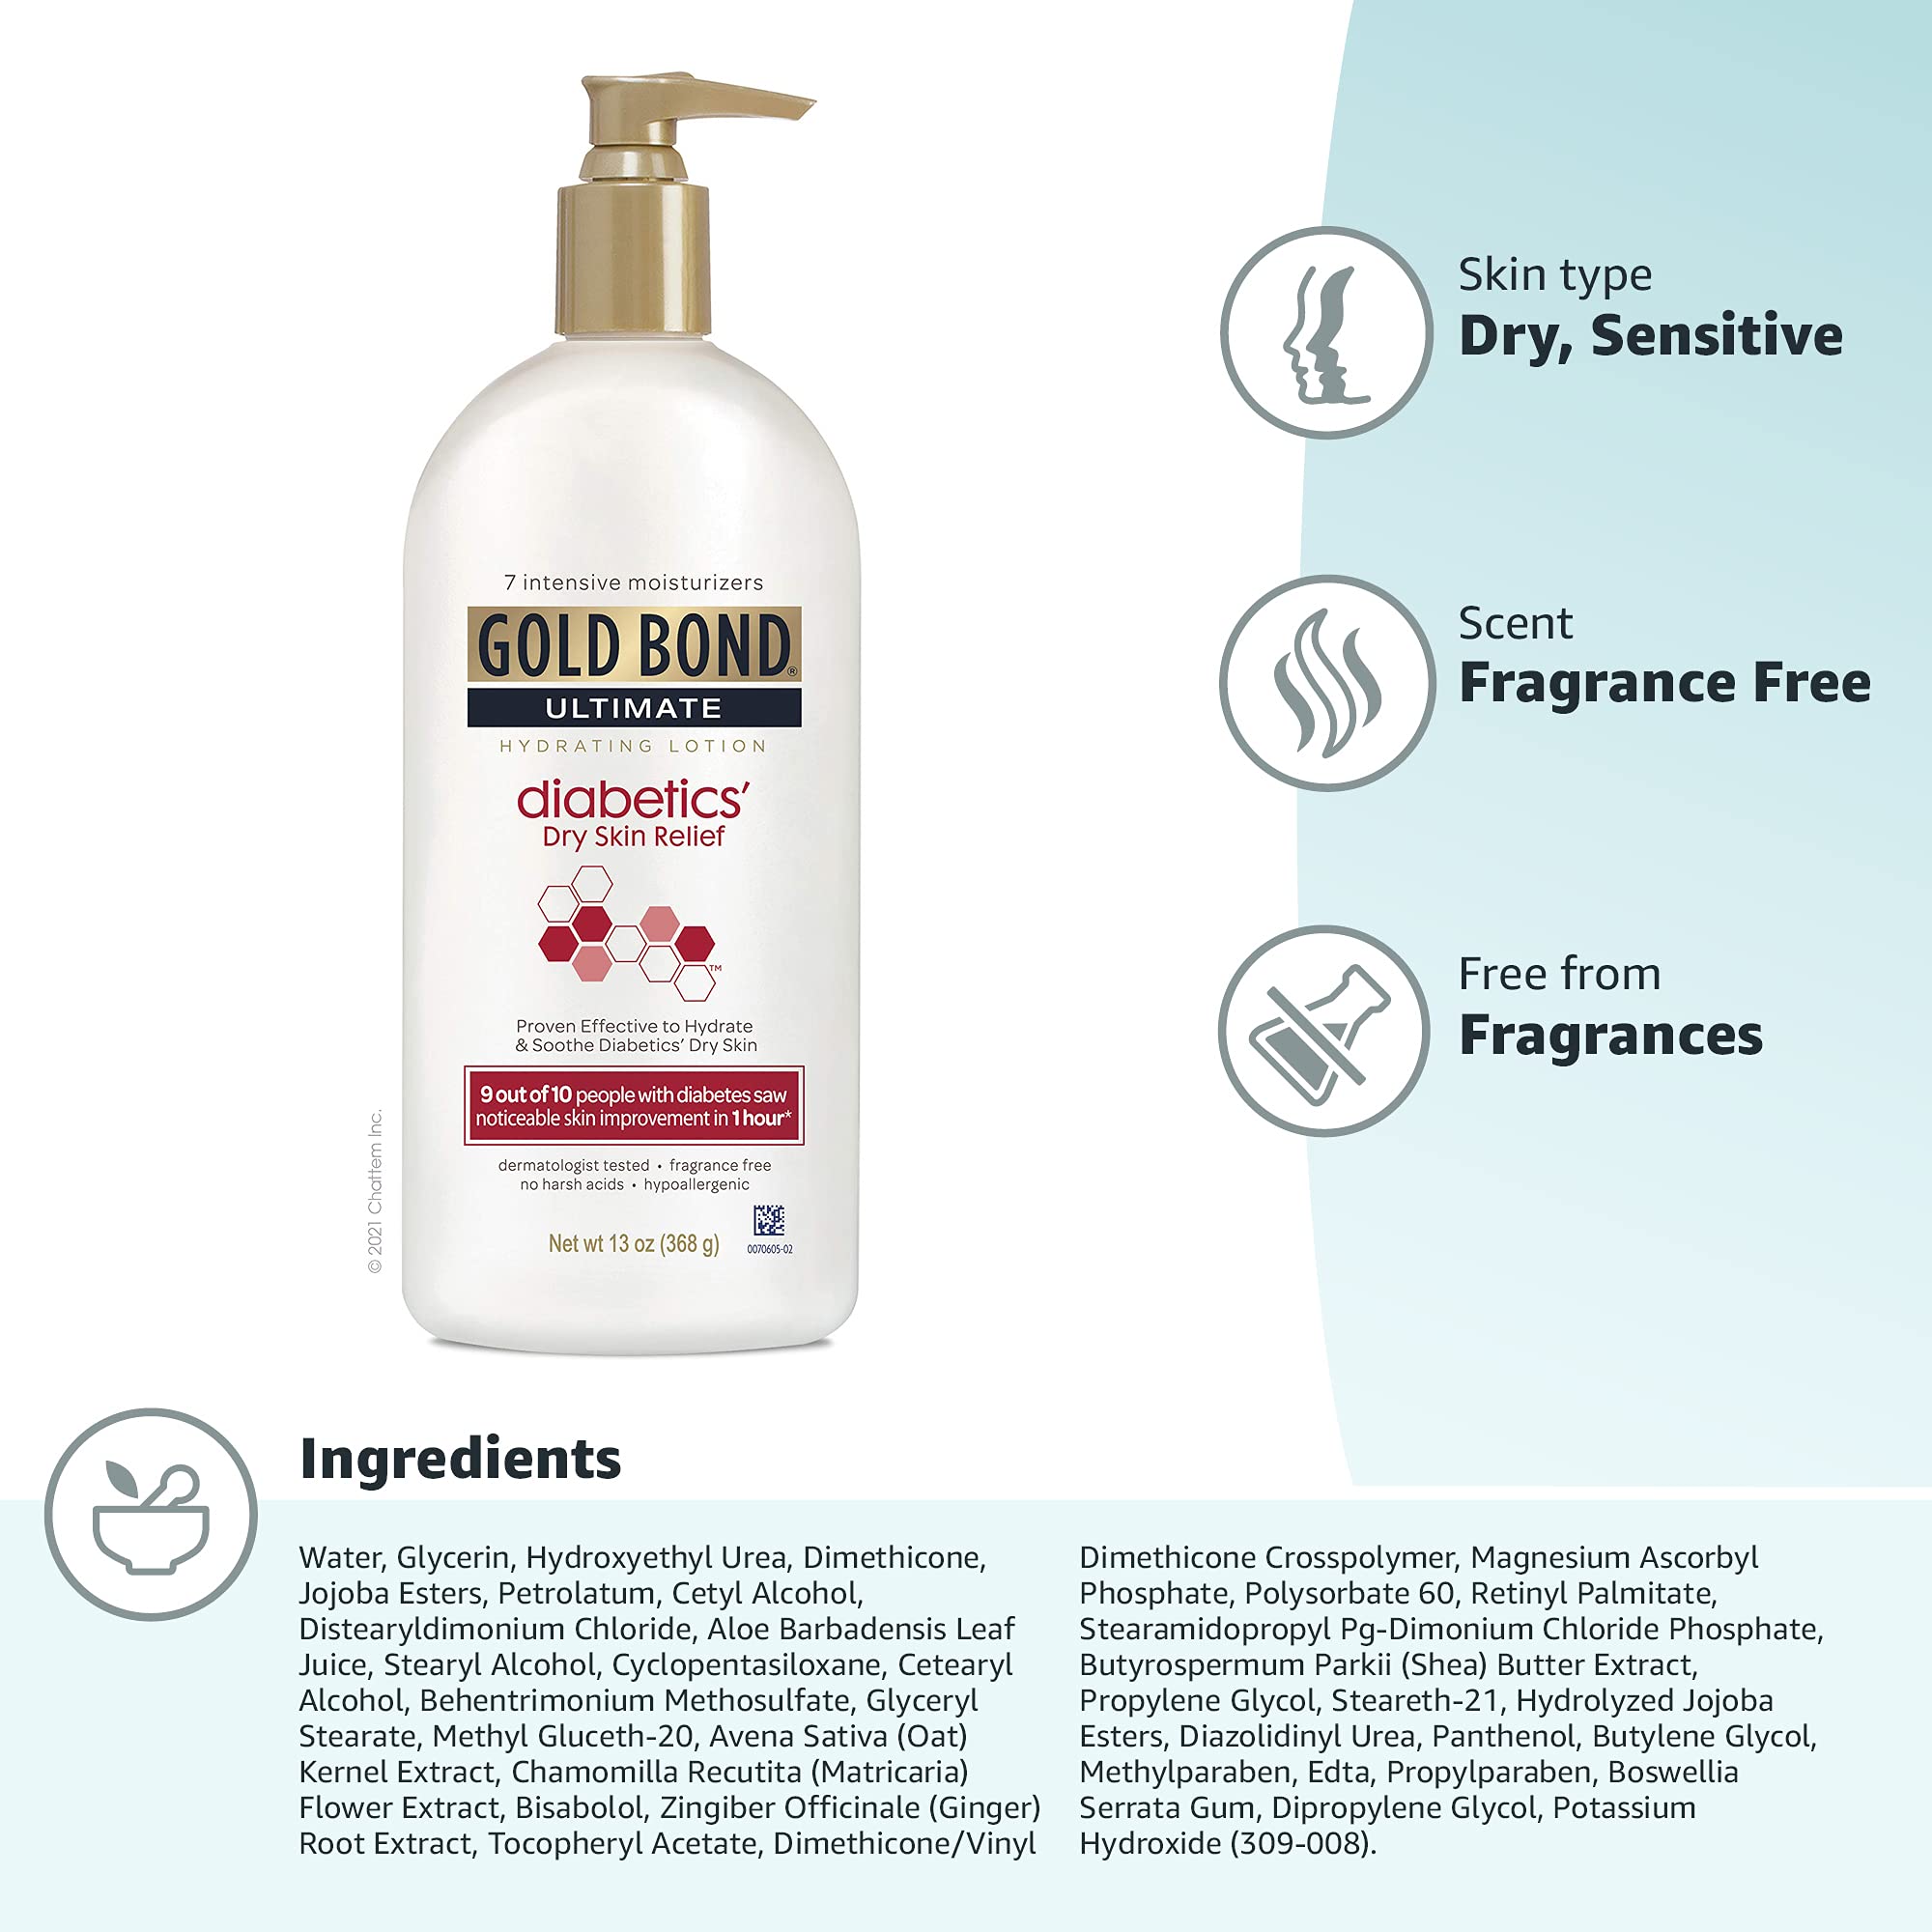 Gold Bond Diabetics' Dry Skin Relief Body Lotion, 13 oz., With Aloe to Moisturize & Soothe